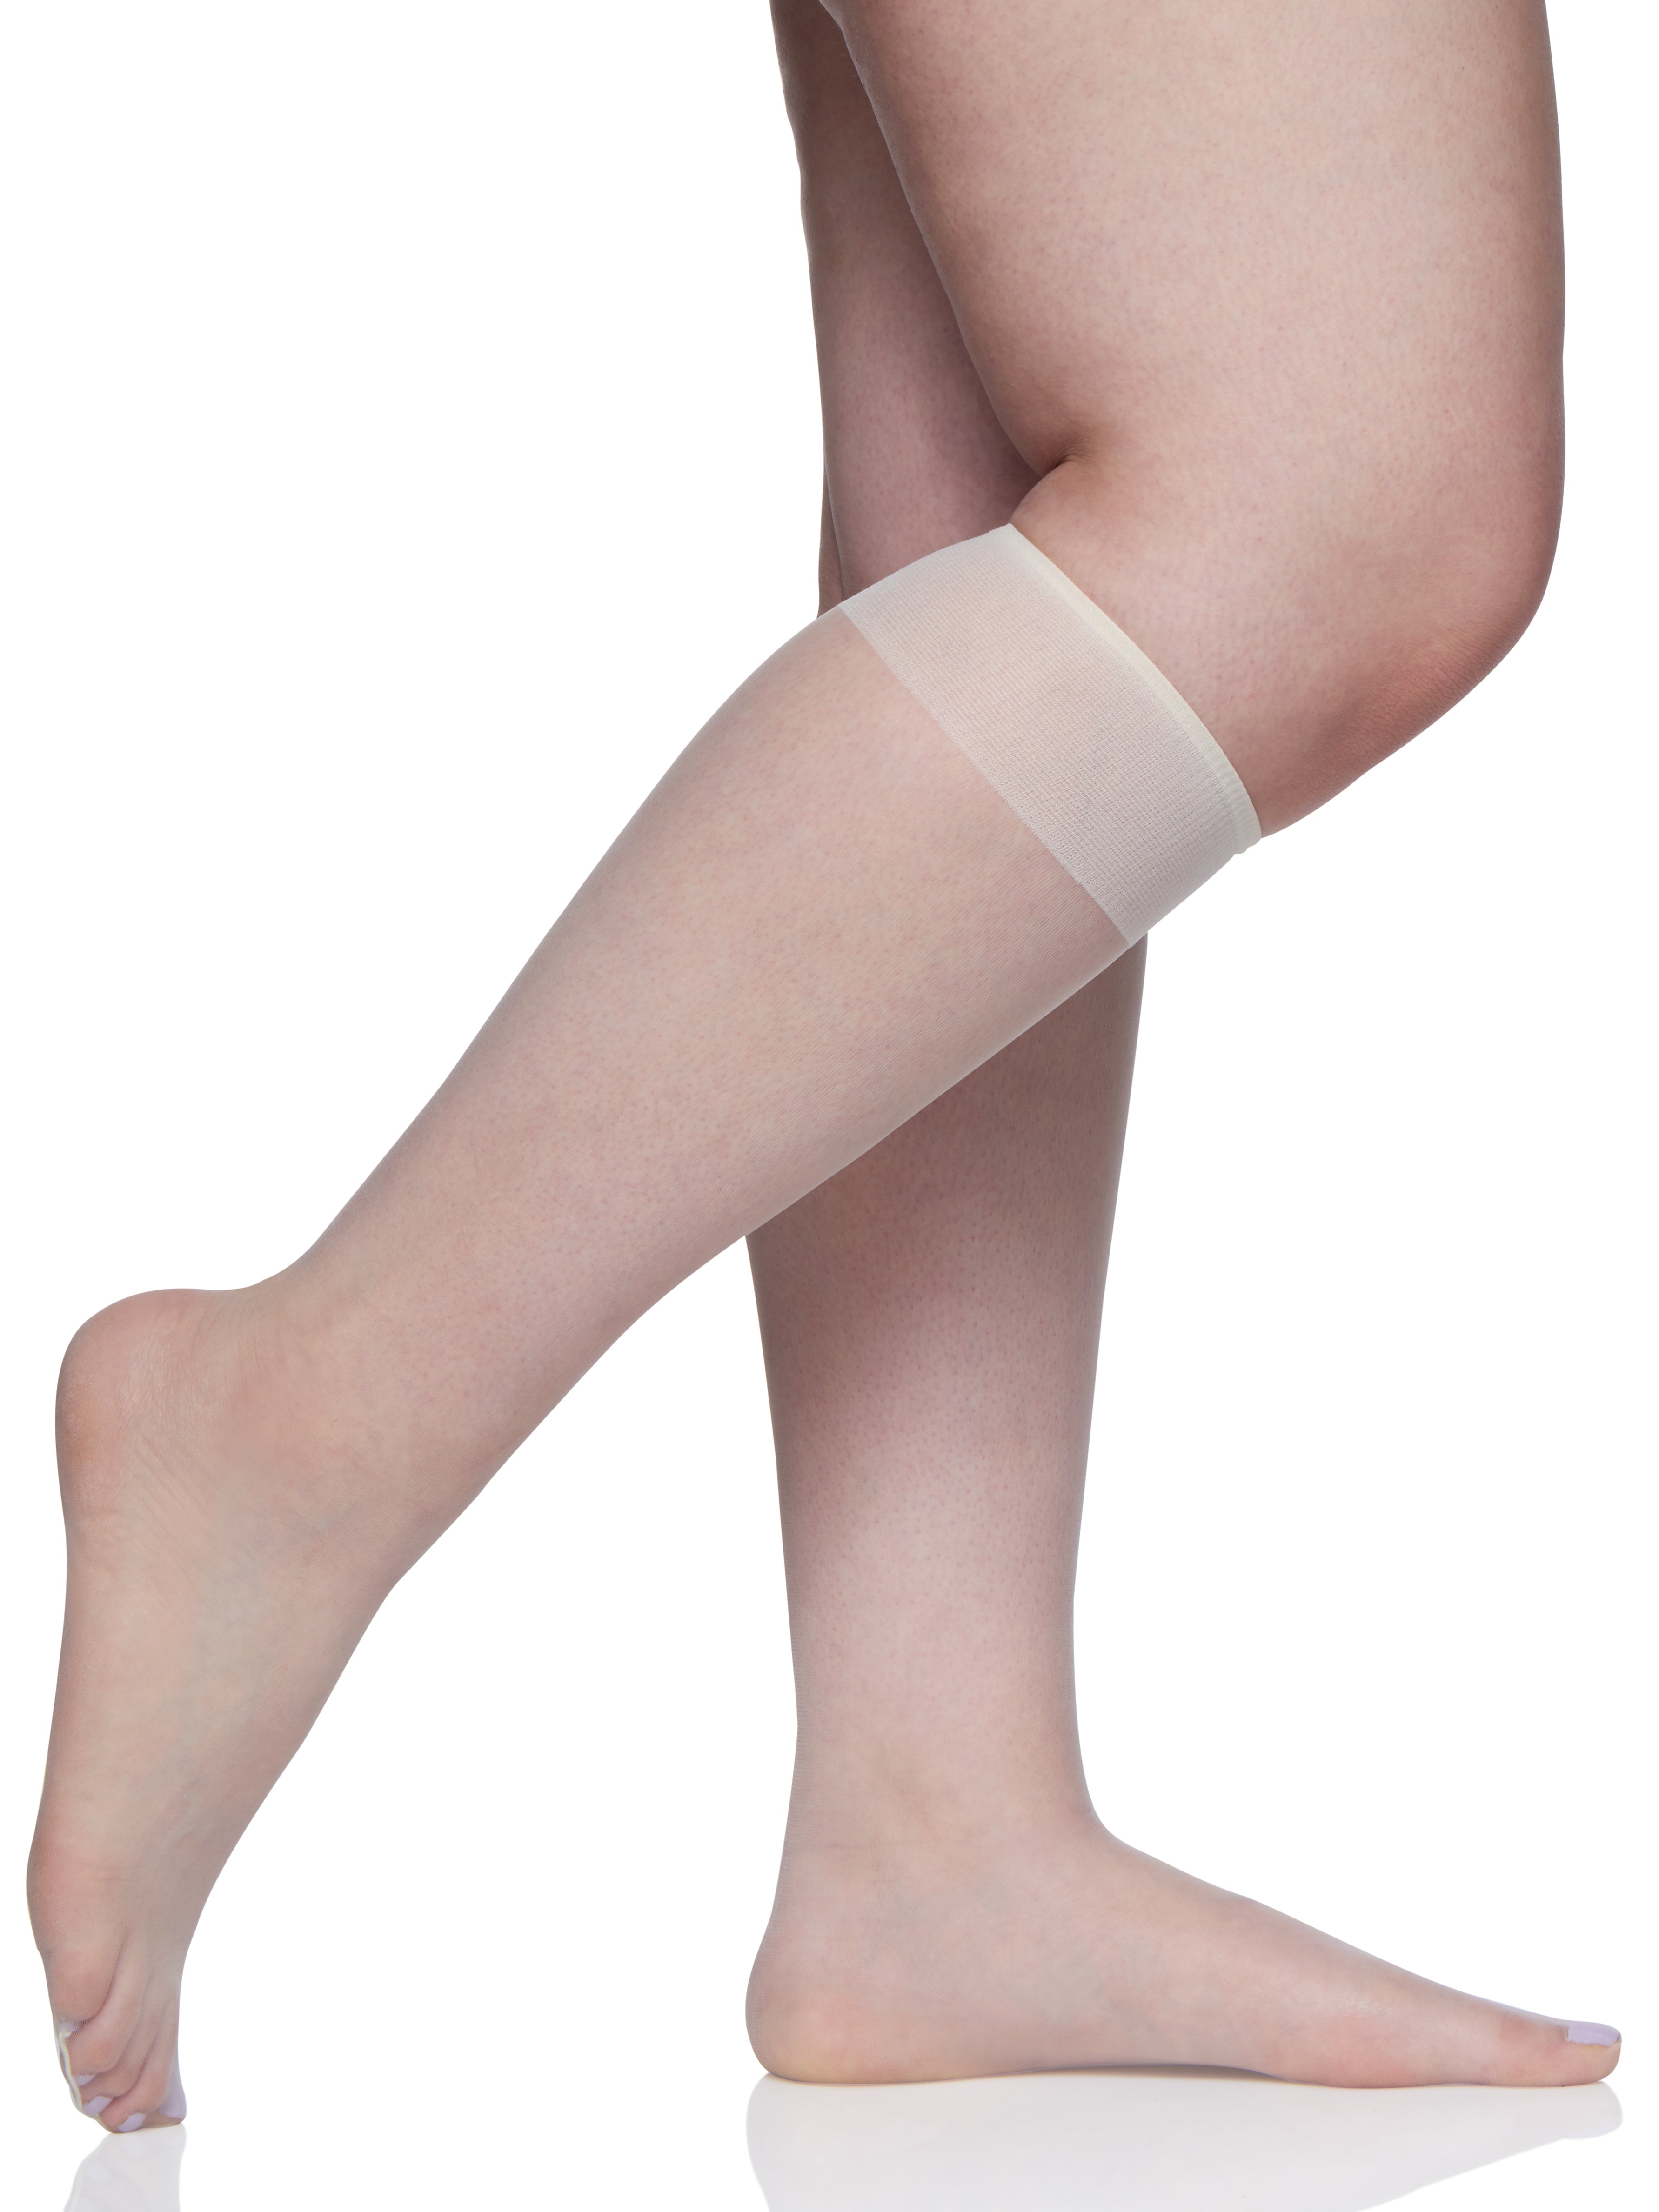 3 Pair Pack Queen Ultra Sheer Knee High with Sandalfoot Toe - 6725